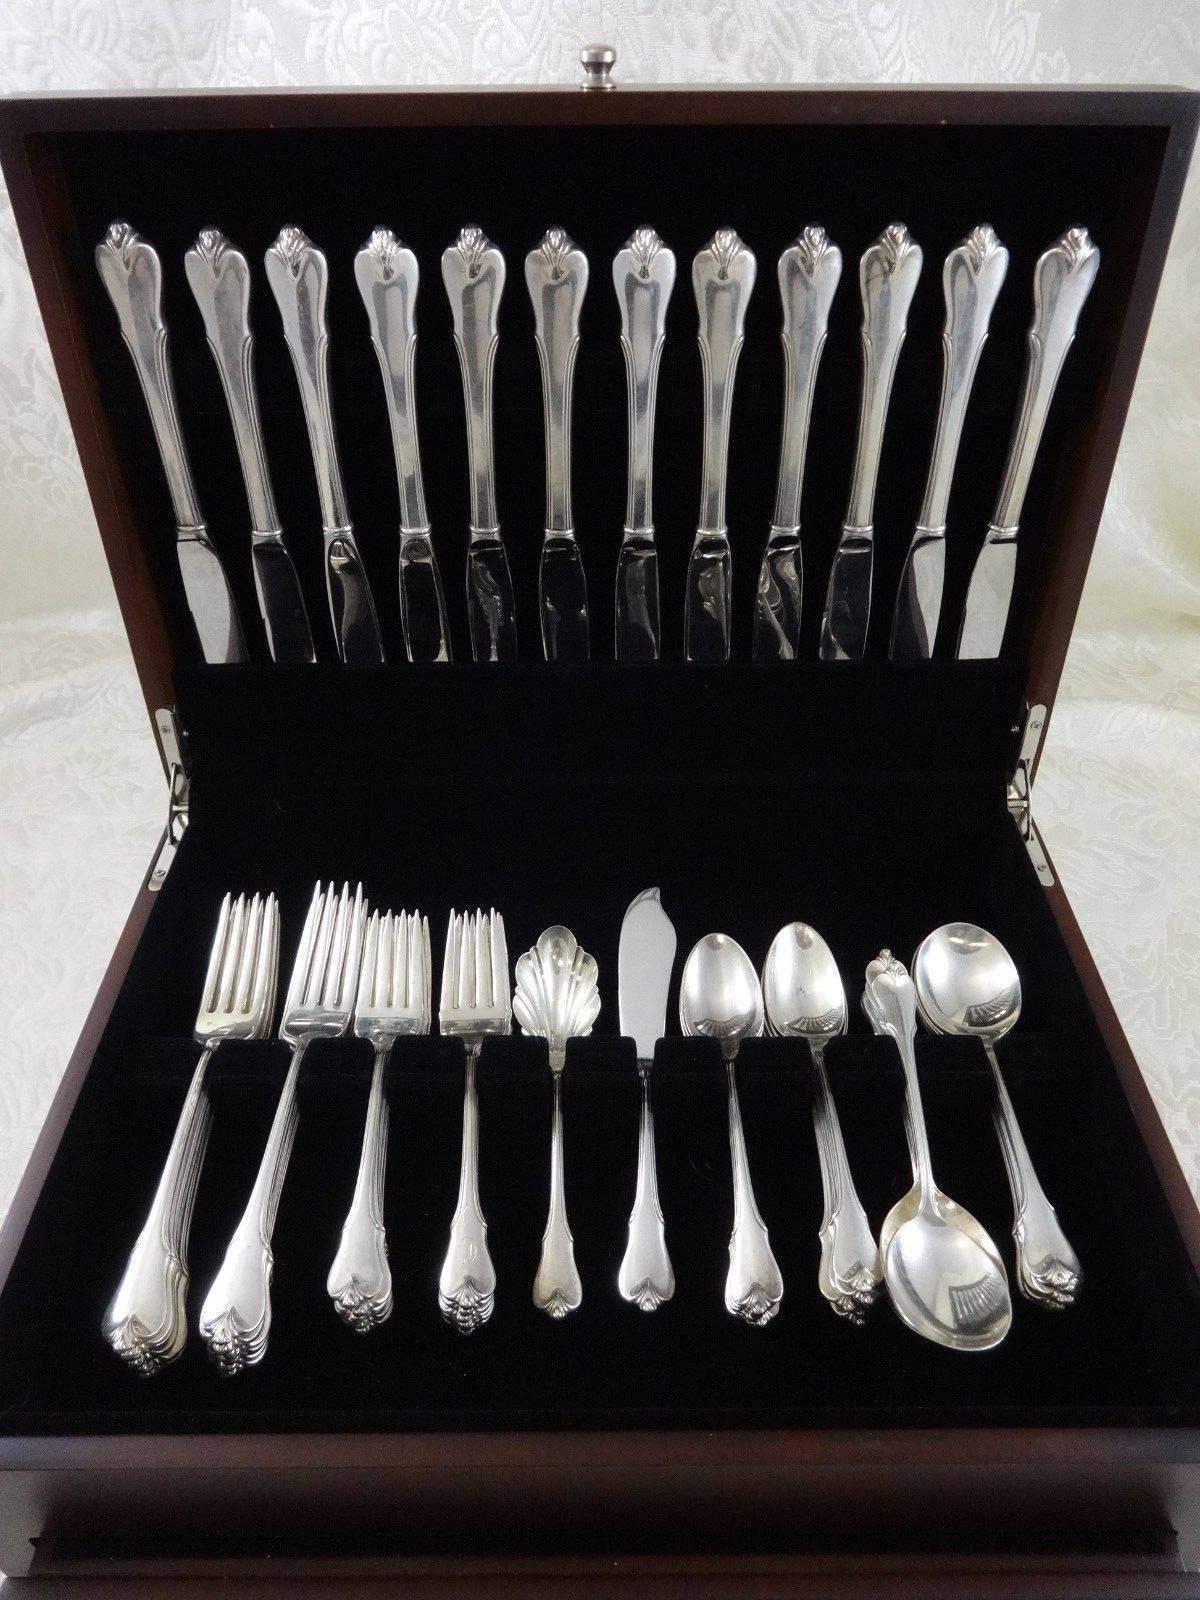 Beautiful Grand Colonial by Wallace sterling silver flatware set of 62 Pieces. This set includes:

Measure: 12 knives, 8 7/8